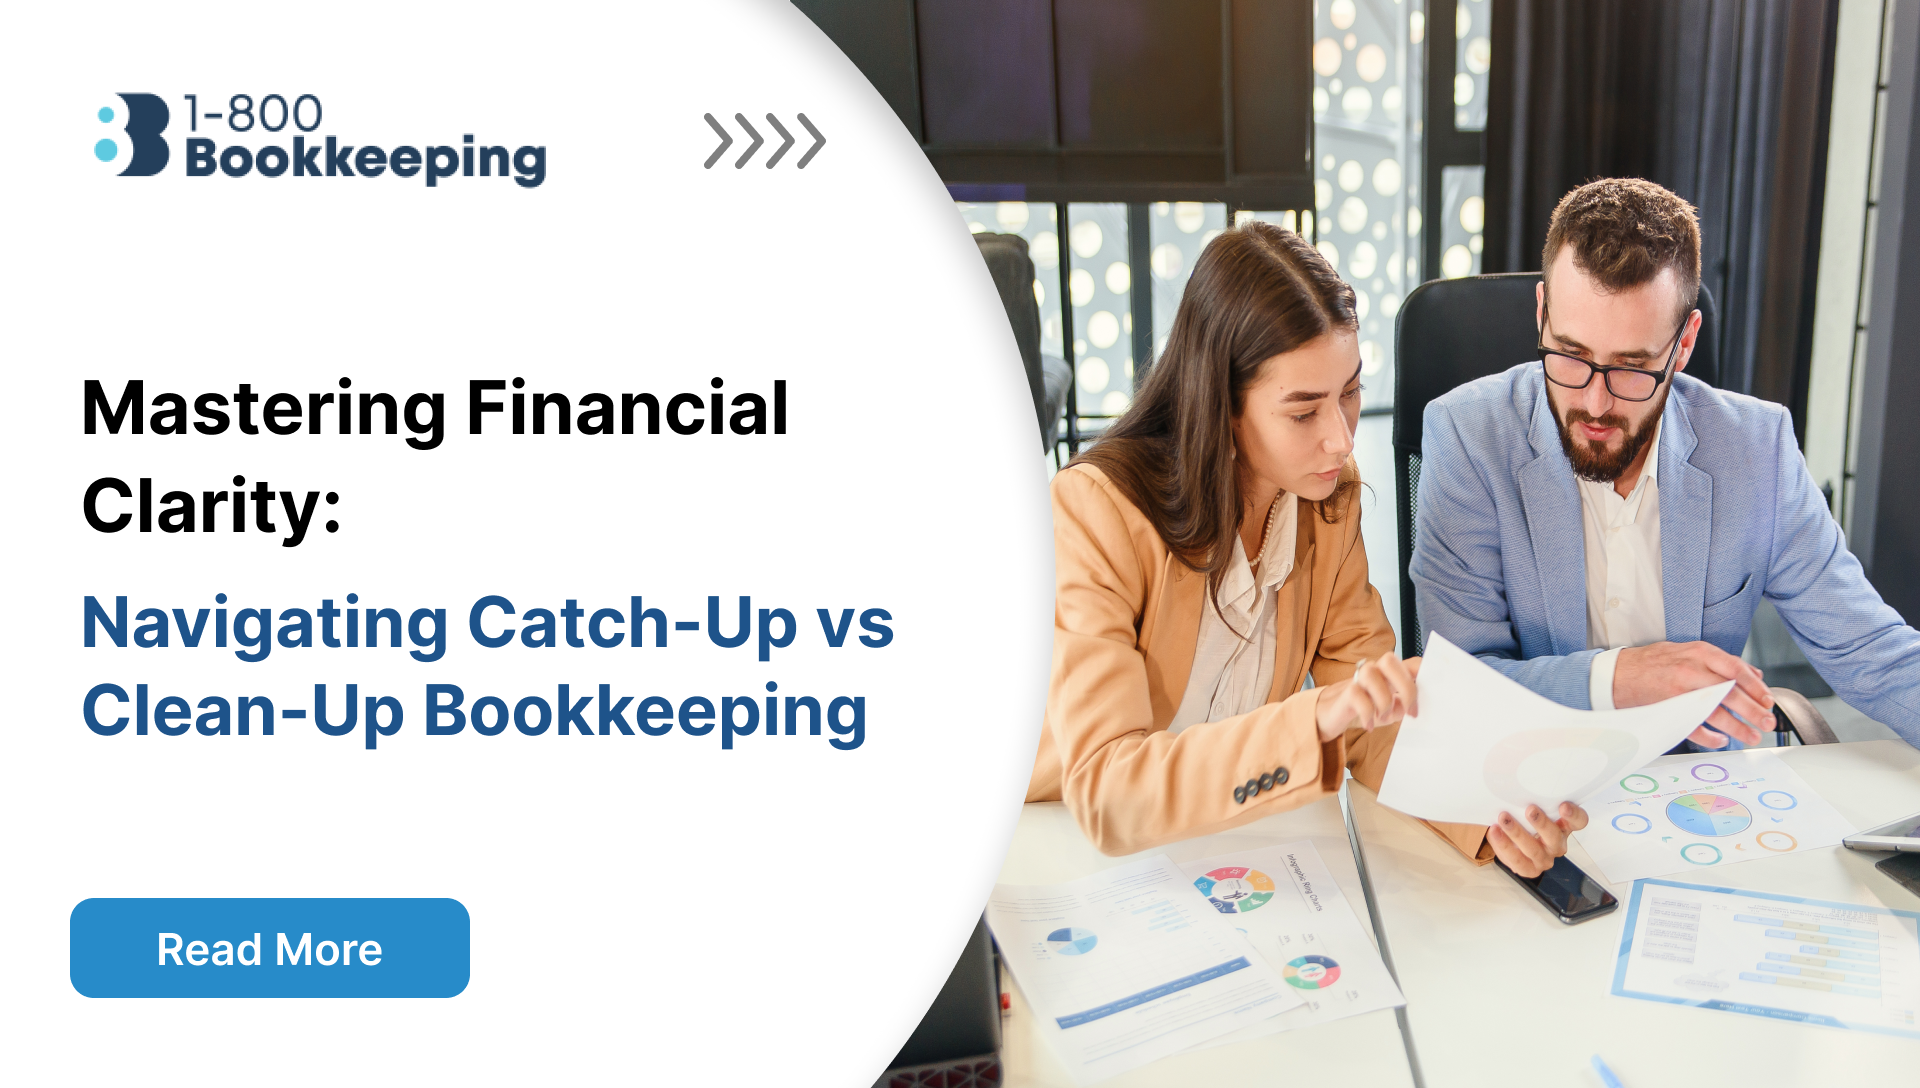 Mastering Financial Clarity: Navigating Catch-Up vs Clean-Up Bookkeeping